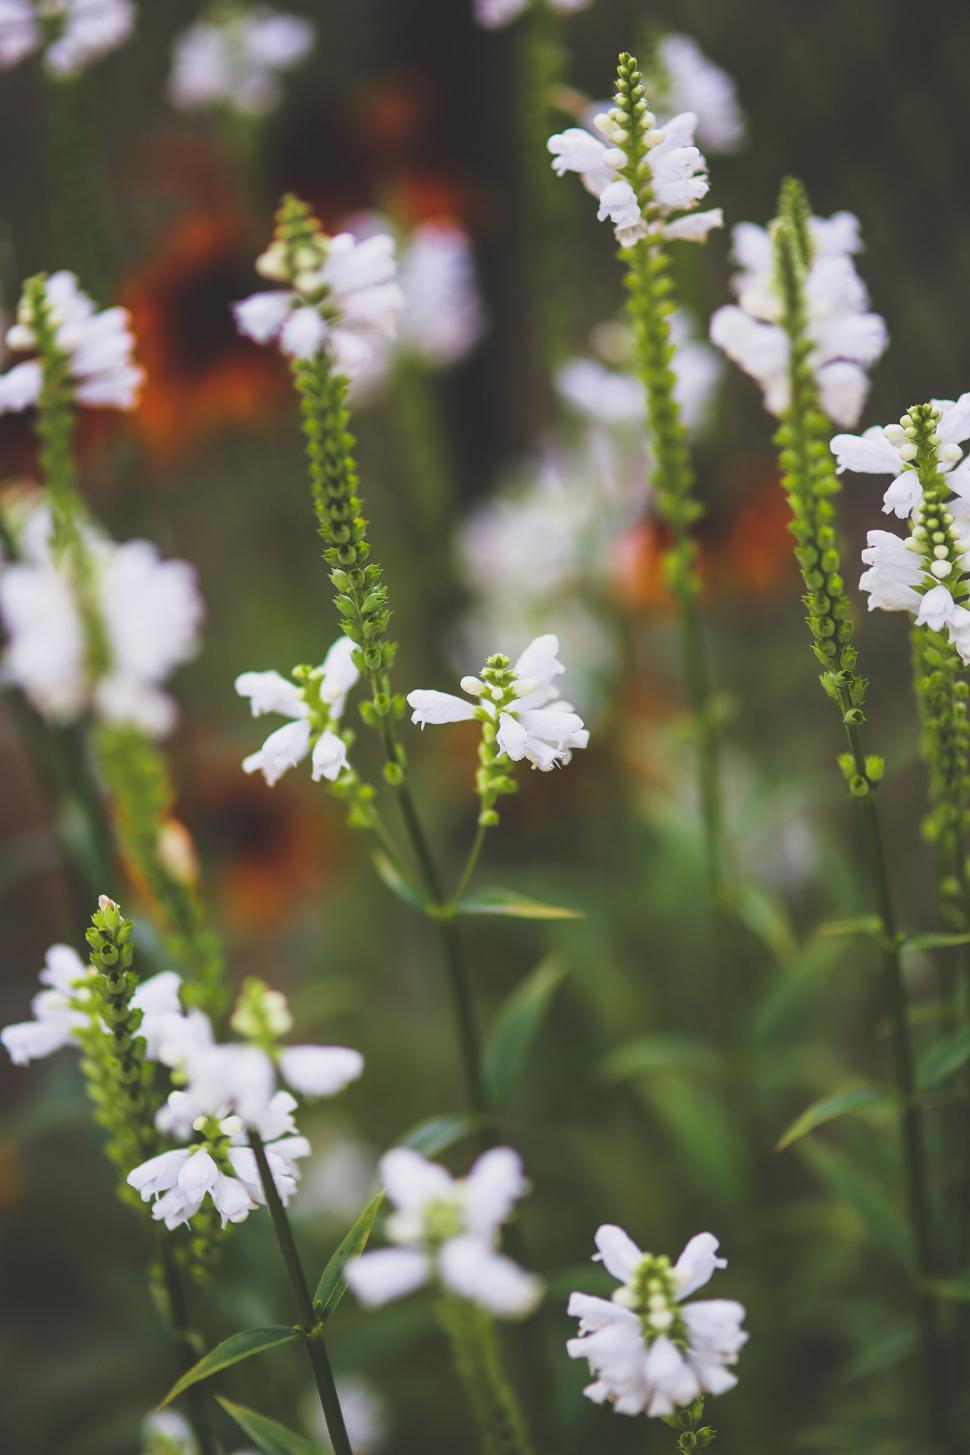 Free Image of White Flowers Blooming in Field 